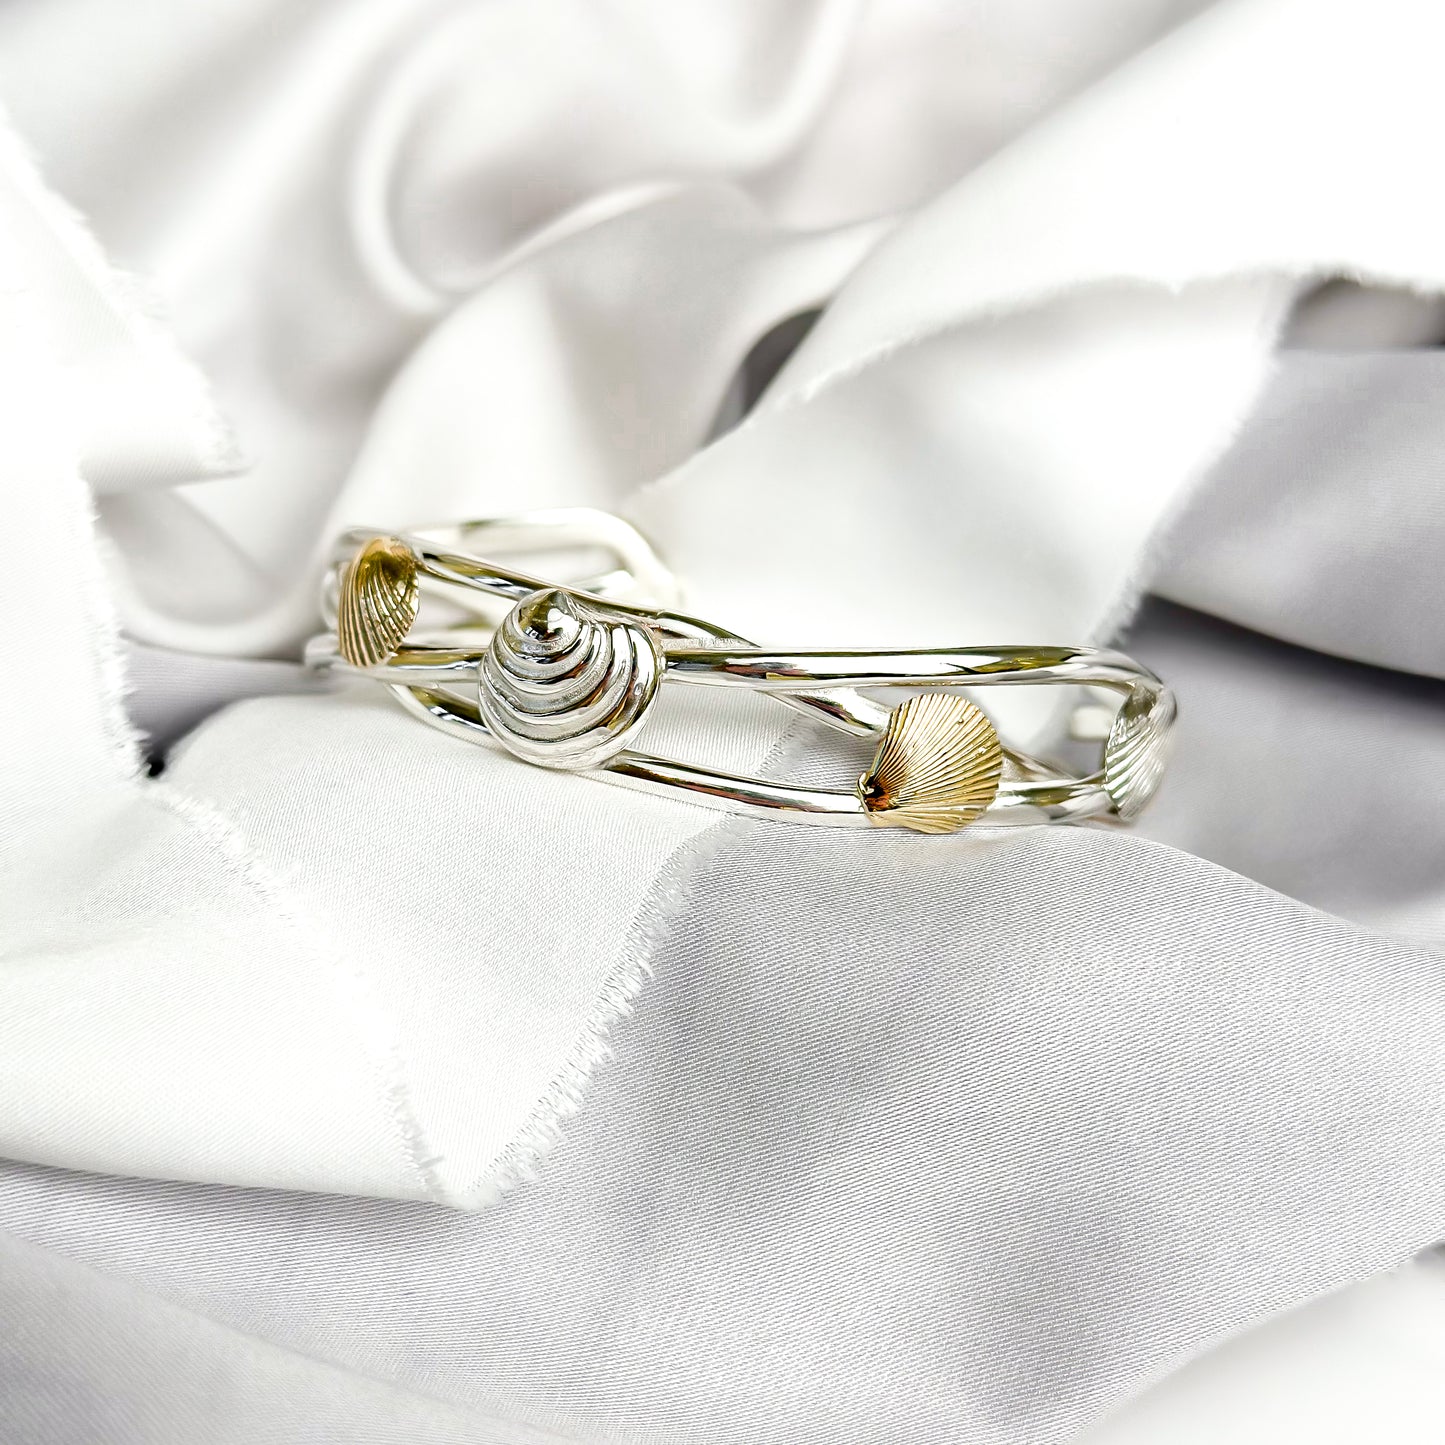 Shell Seeker Gold and Sterling Silver Shell Cuff Bangle - No. 2